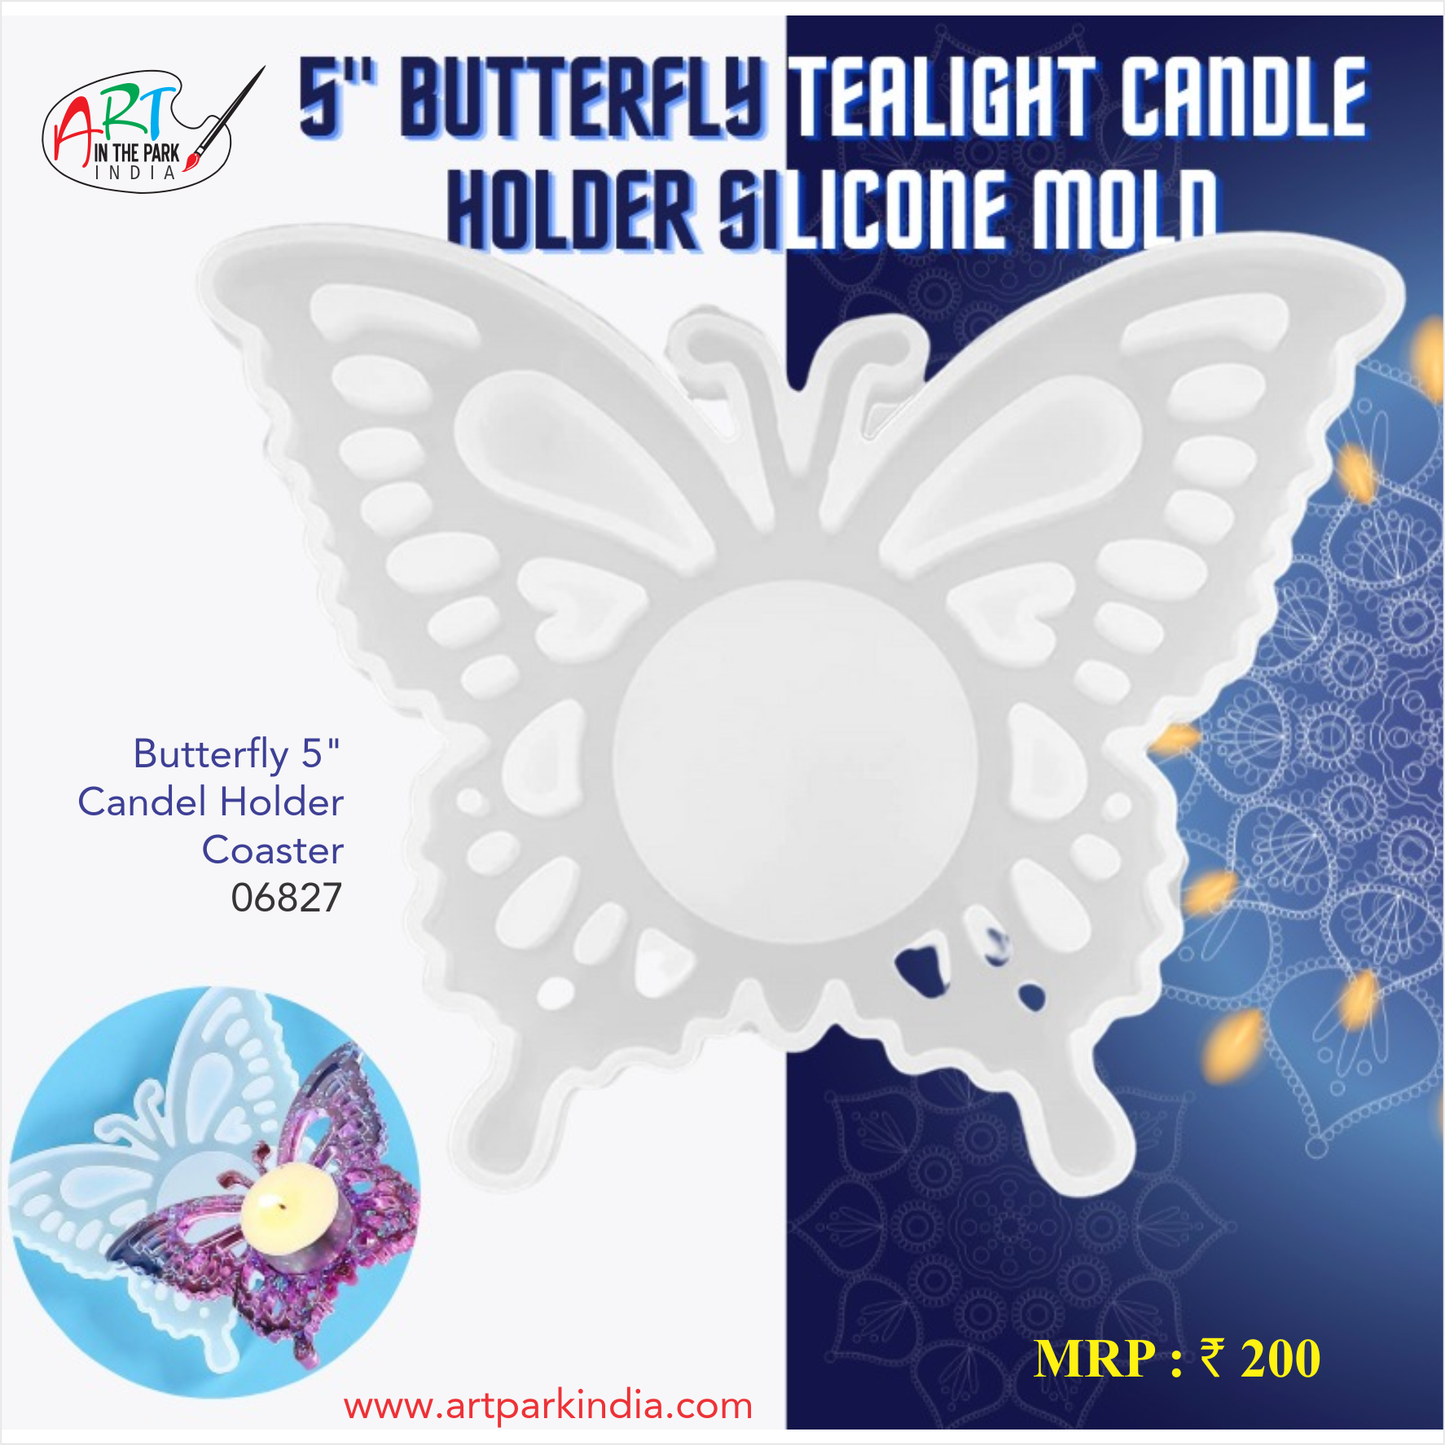 Artpark Silicon Mould Butterfly 5" Candel Holder